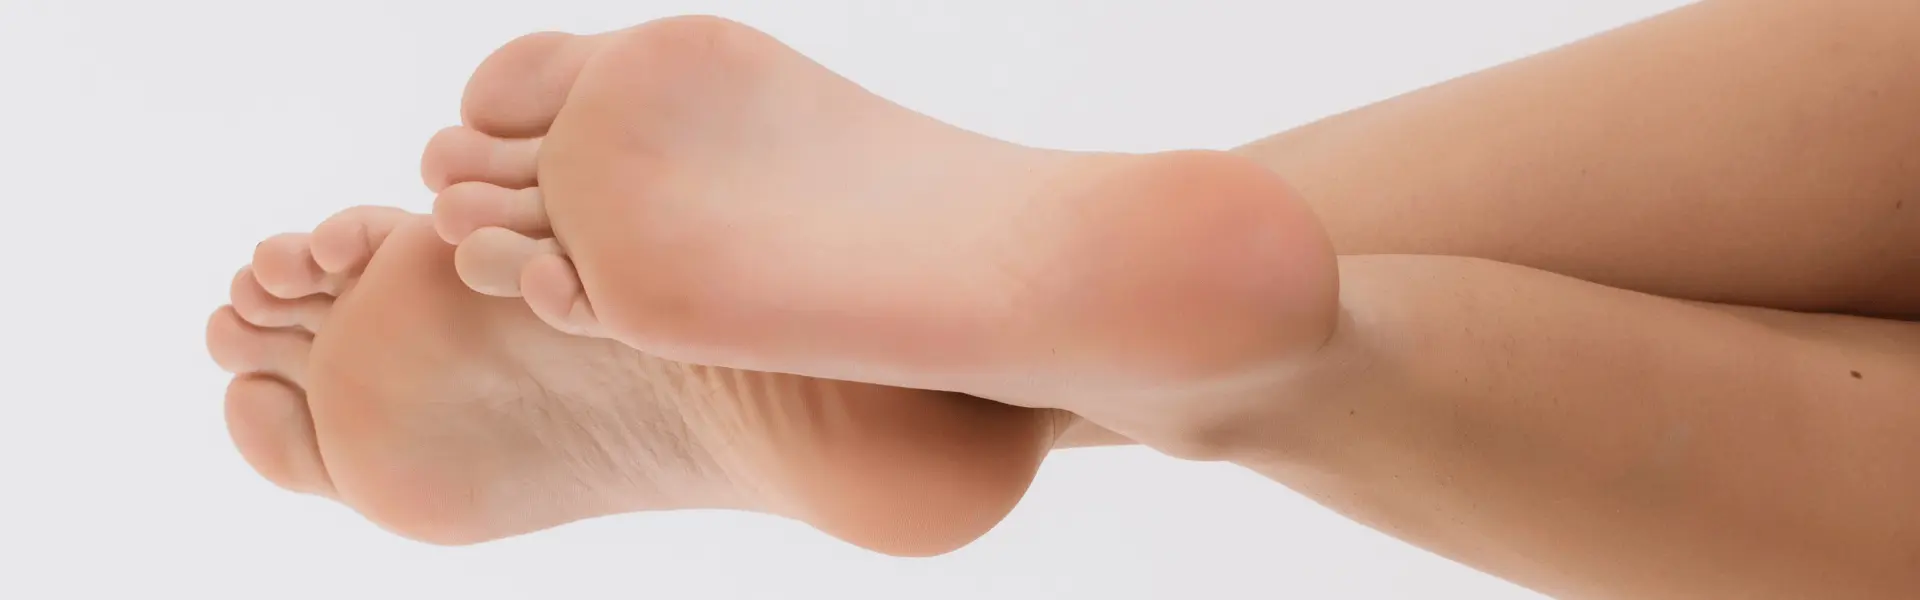 A woman's feet on a white background.